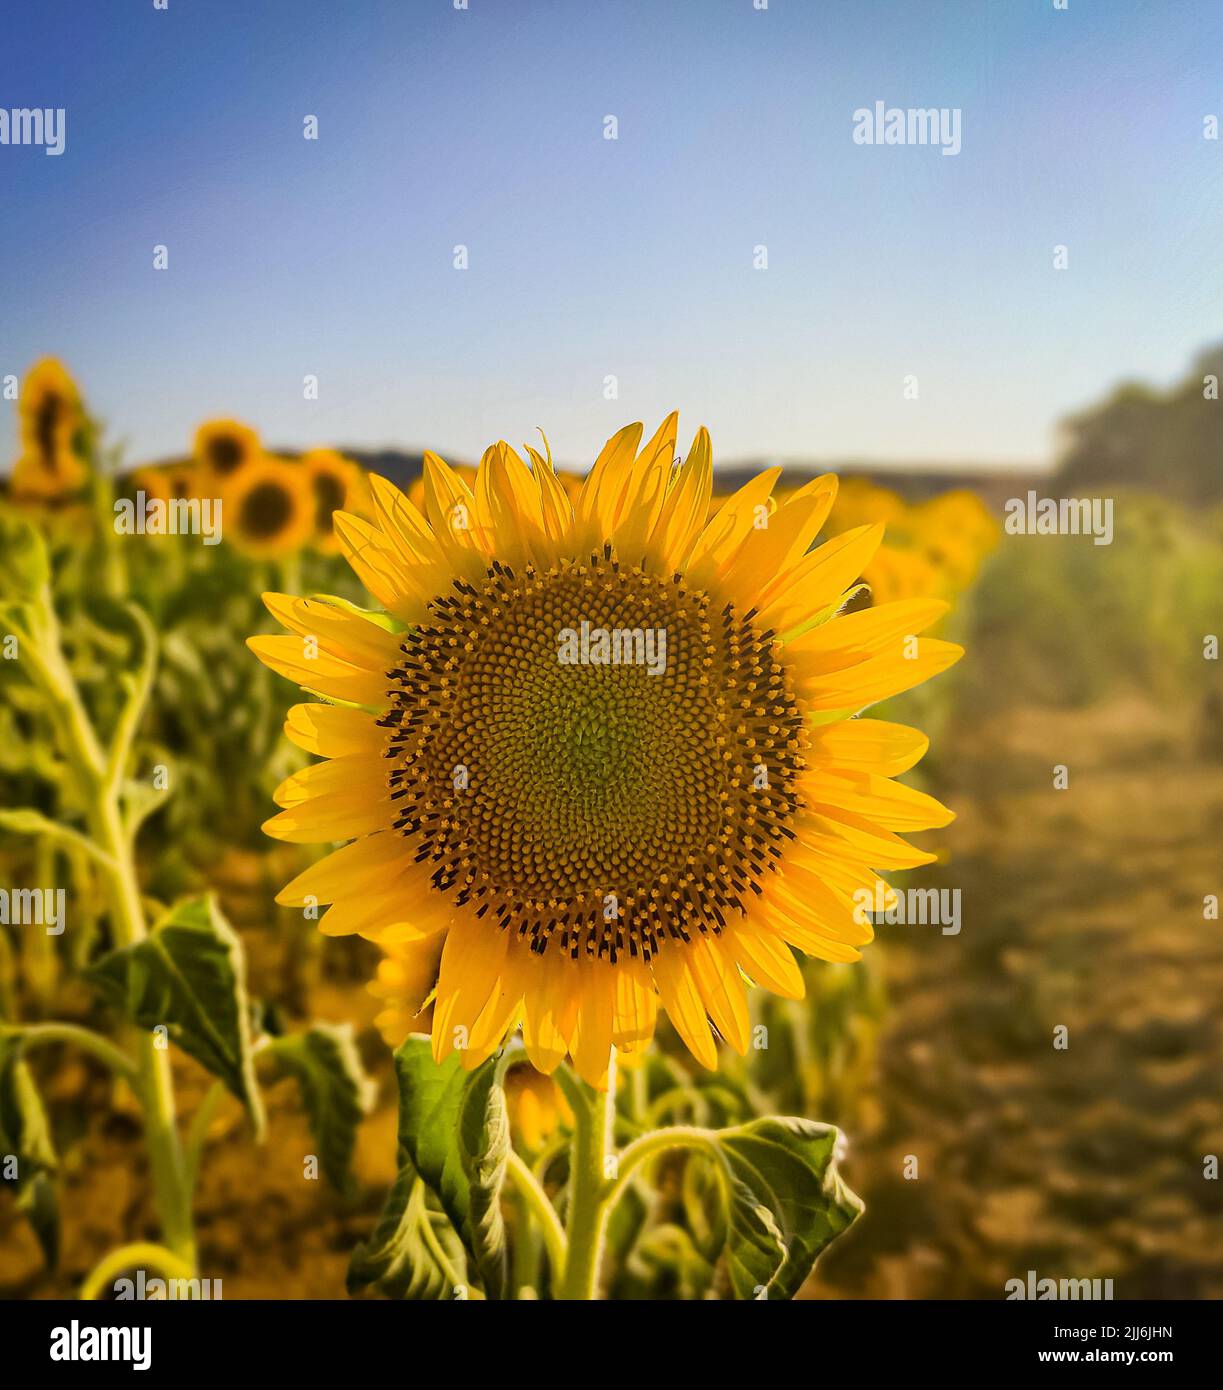 A closeup shot of a blooming bright yellow sunflower Stock Photo